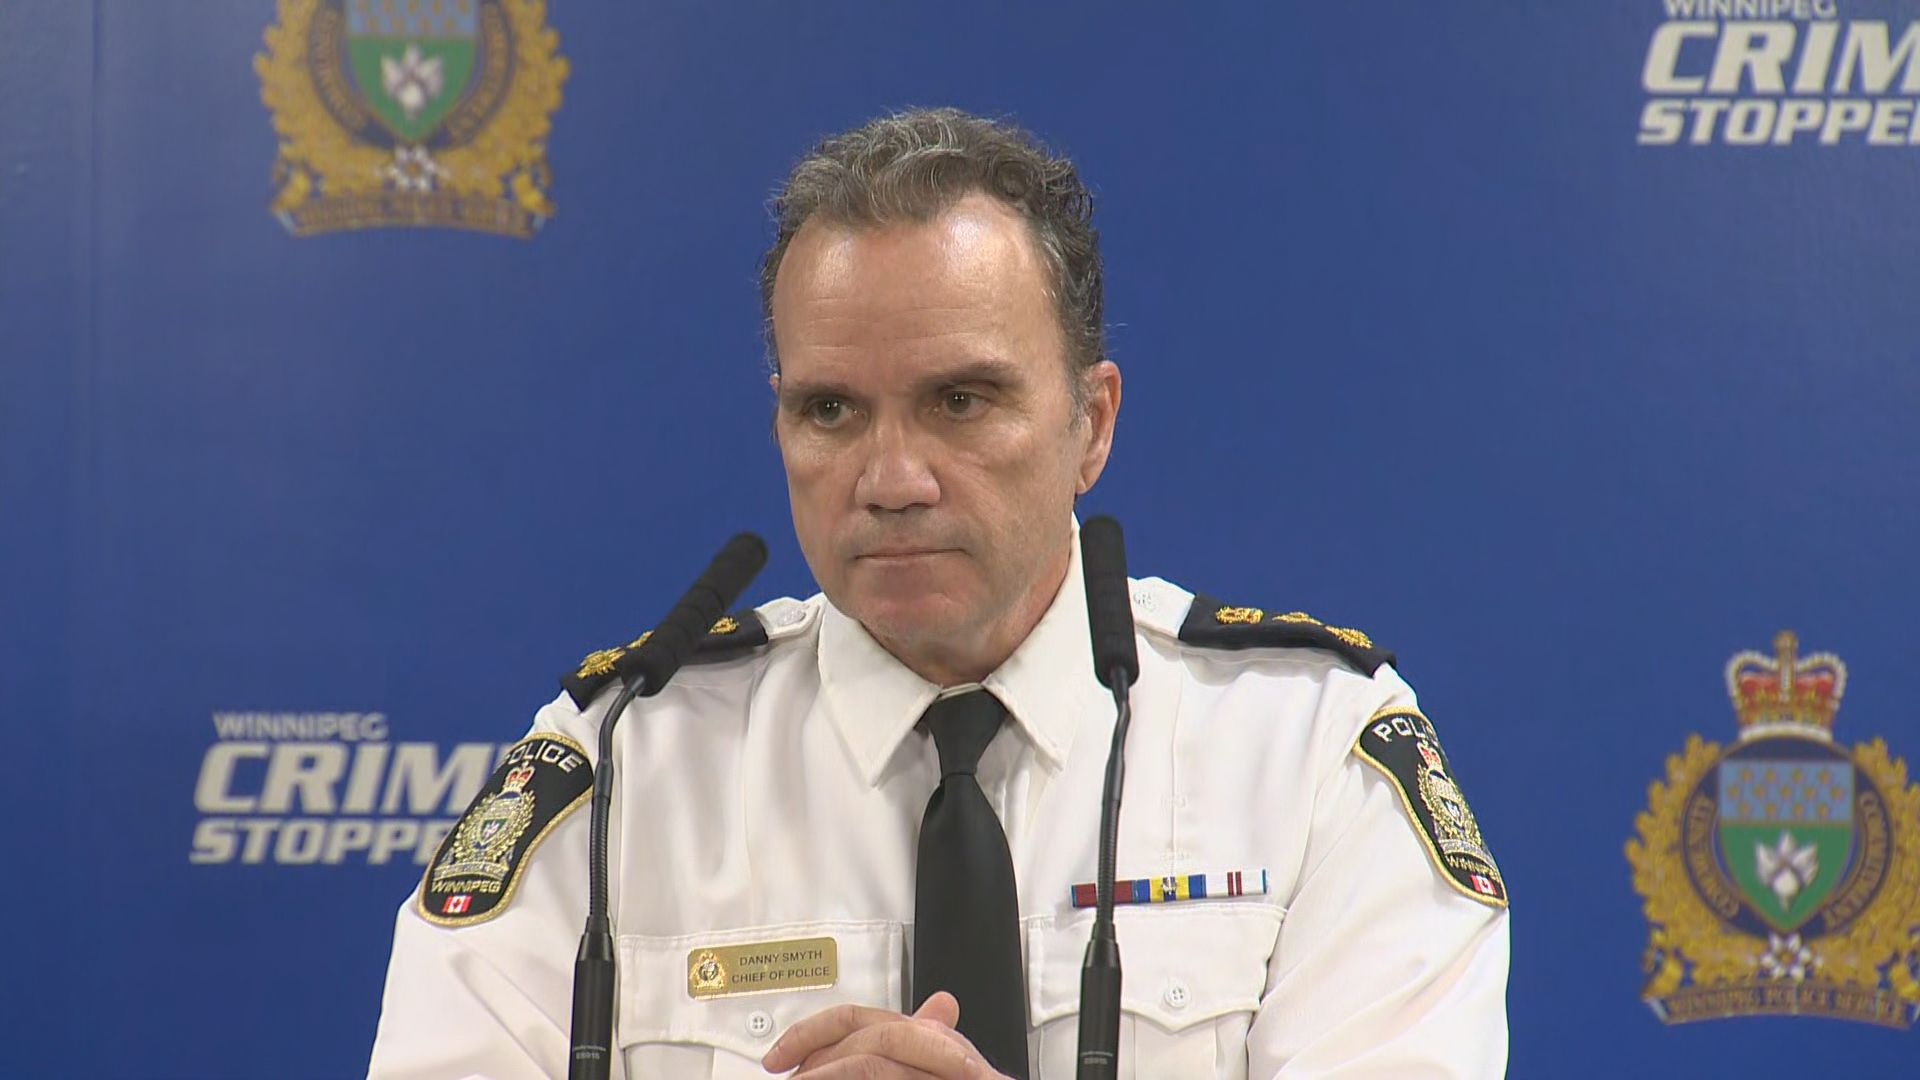 Winnipeg police detail standoff: Officers shot during armed robbery response